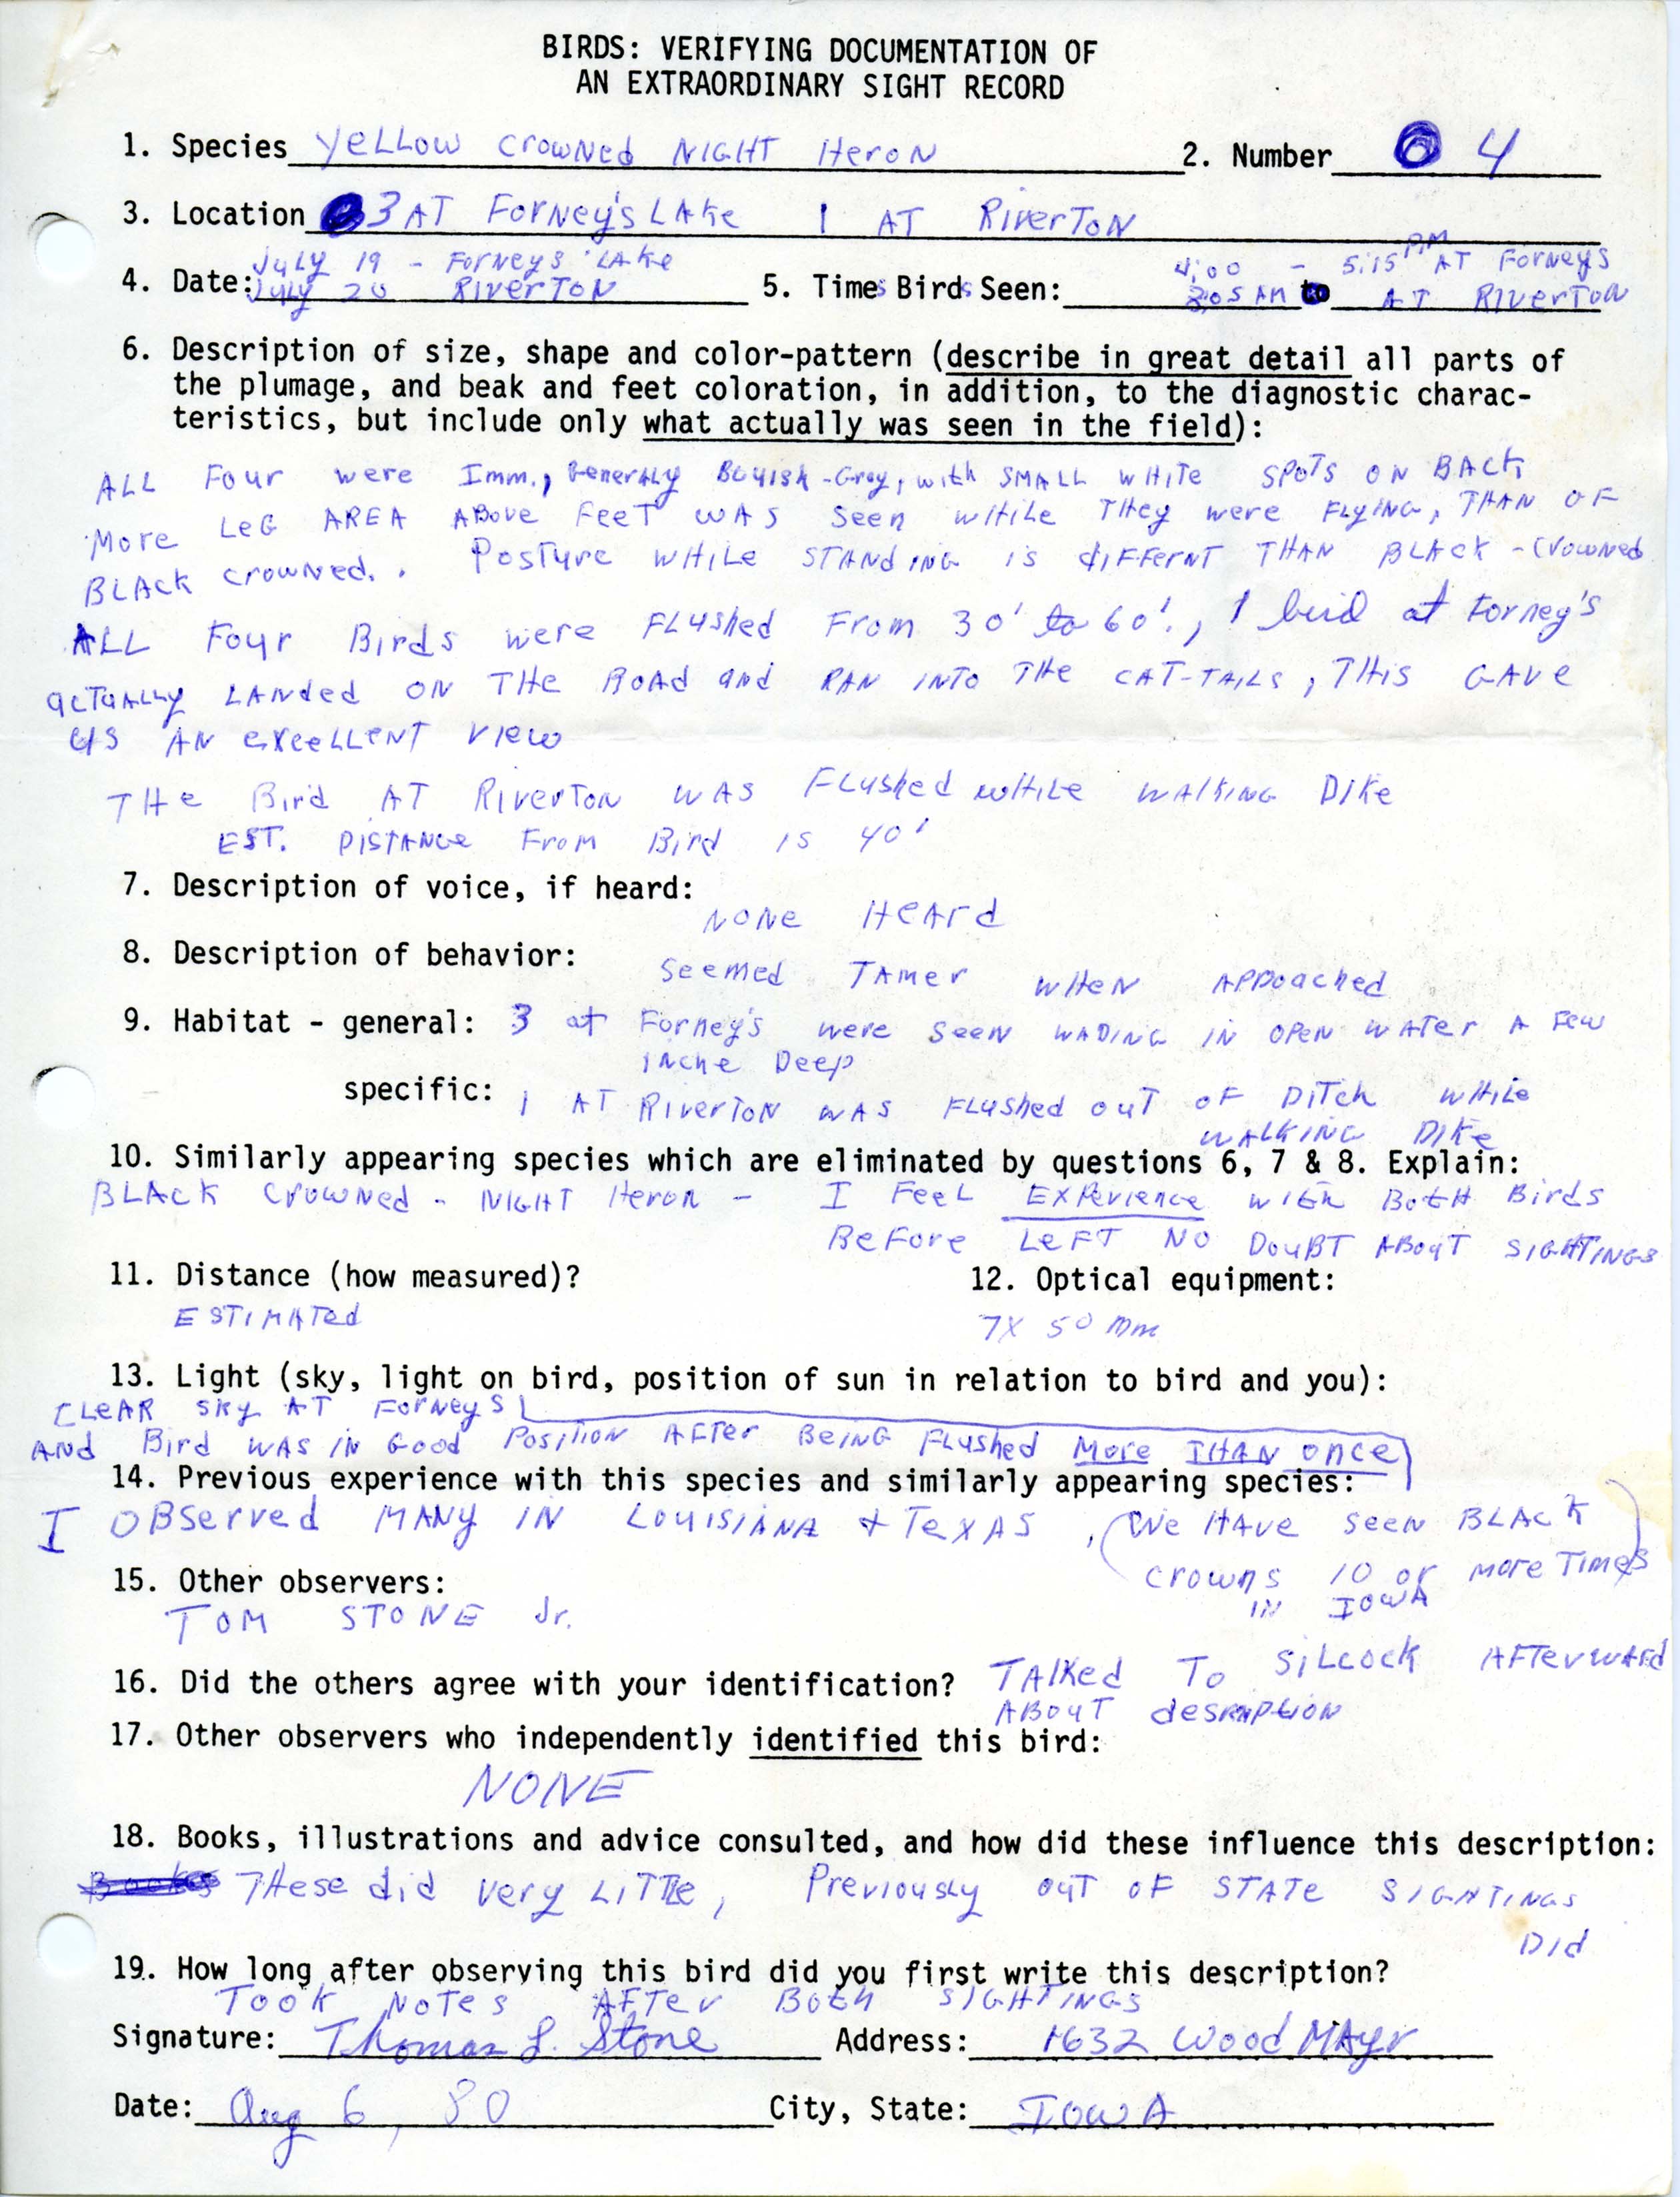 Rare bird documentation form for Yellow-crowned Night Heron sightings at Forneys Lake and Riverton in 1979